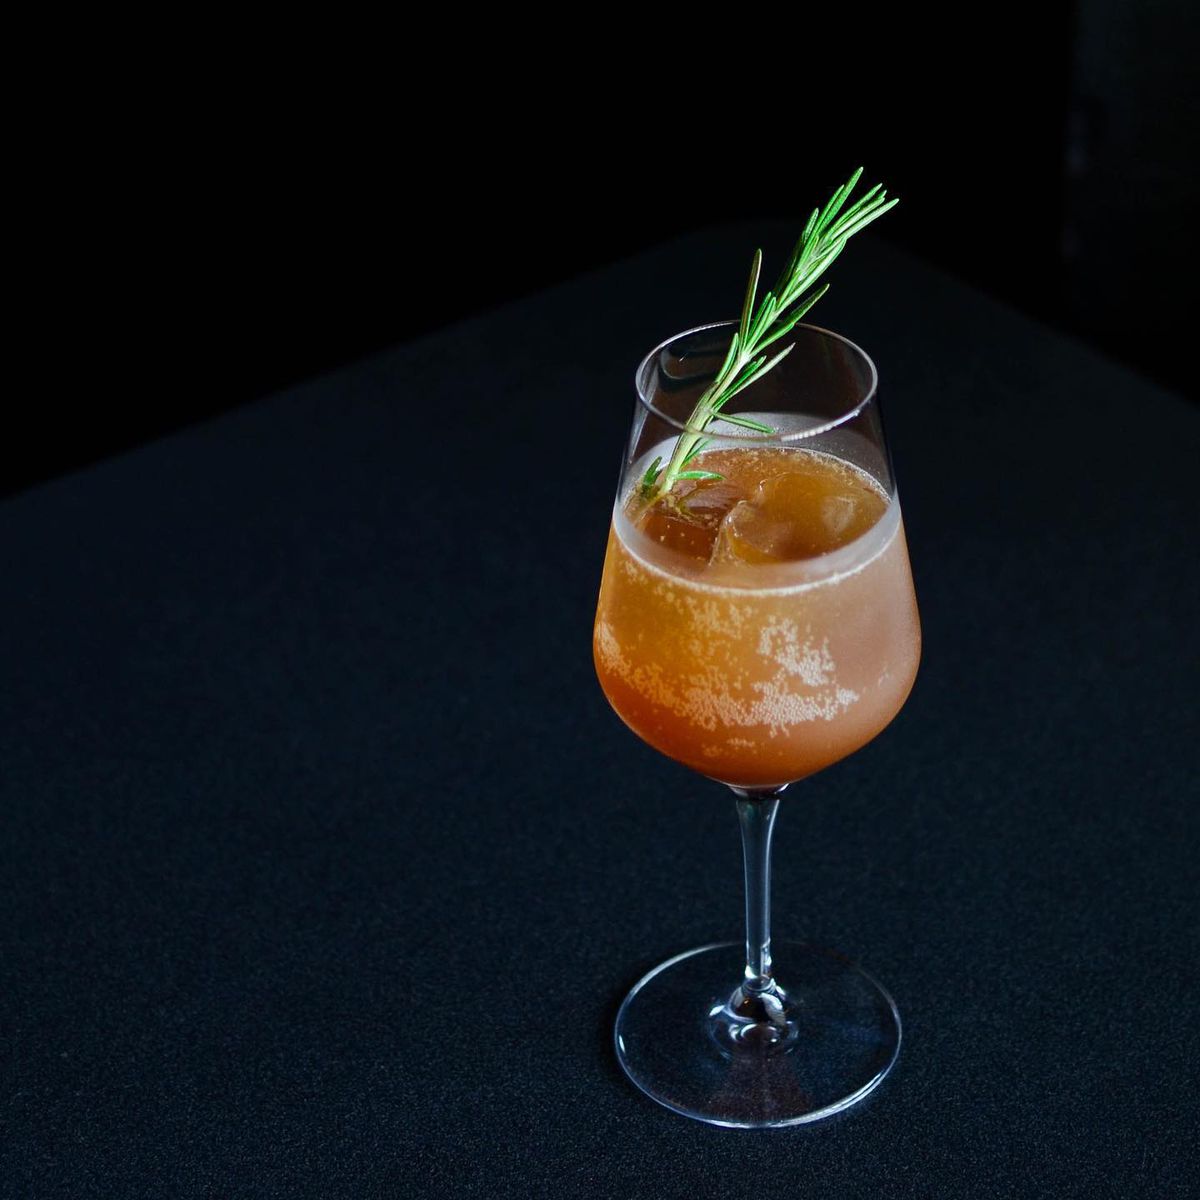 A chilled orange beverage over a big ice cub with a rosemary garnish in a wine glass on a black topped bar